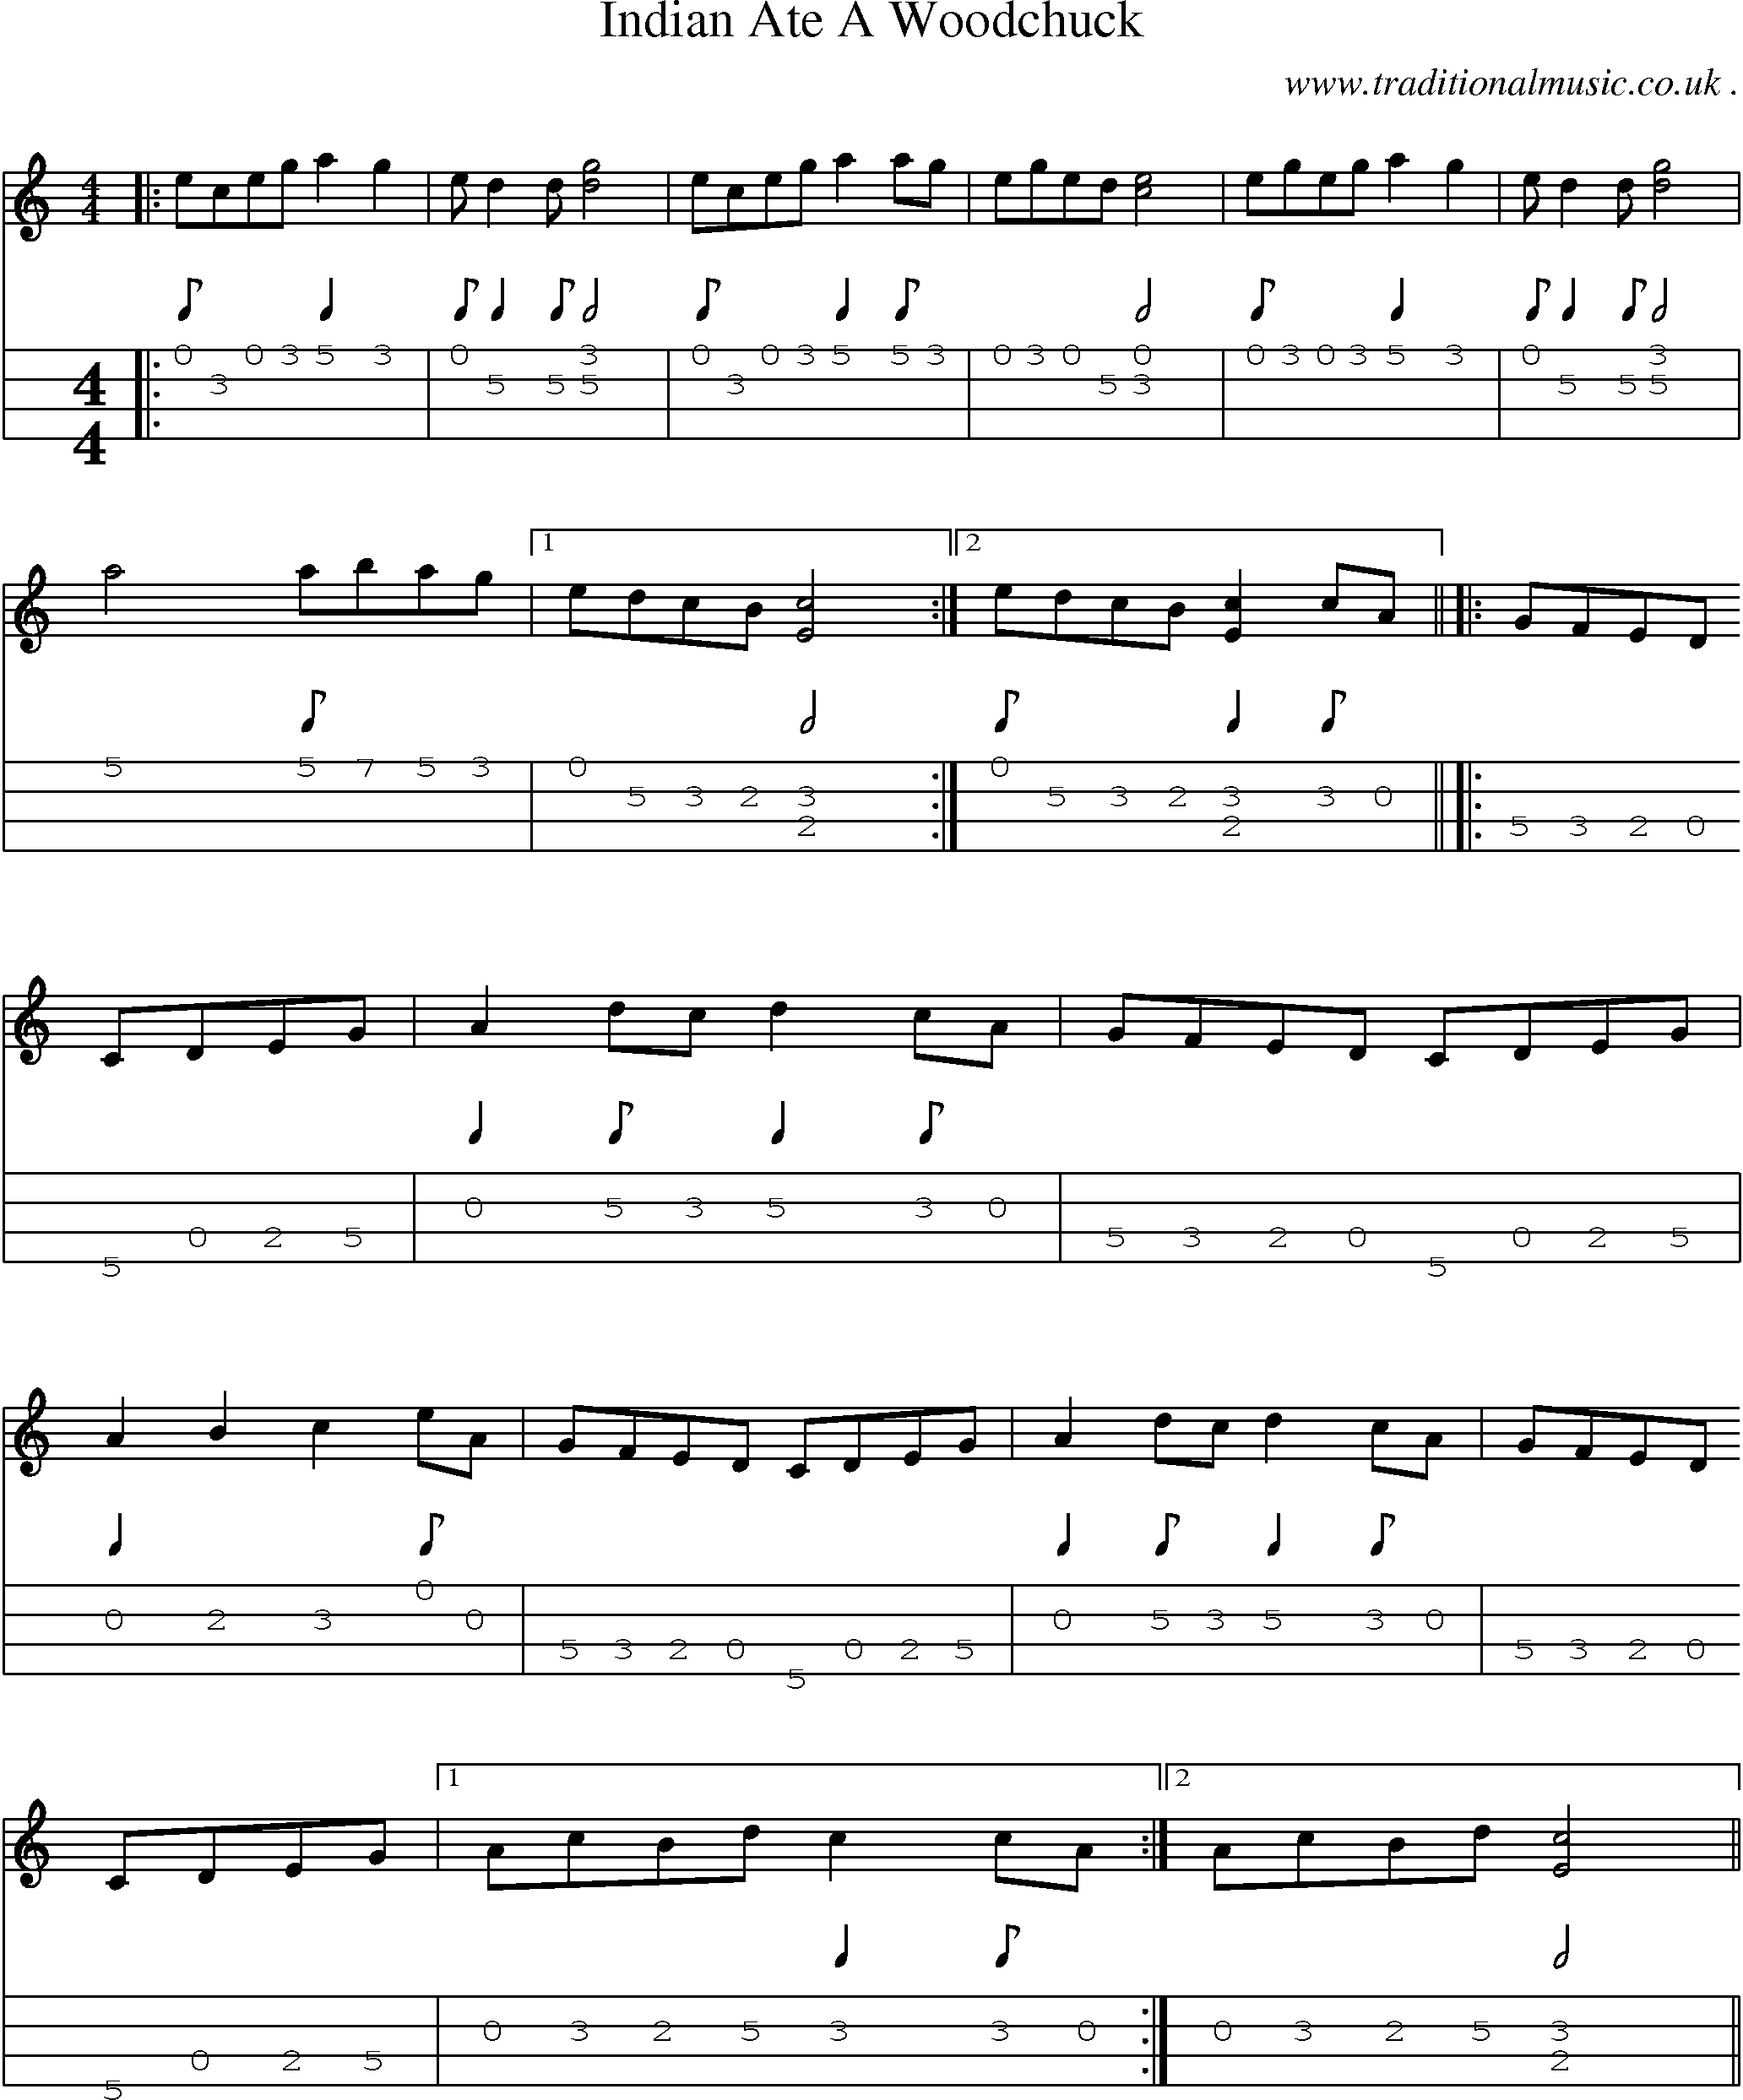 Music Score and Mandolin Tabs for Indian Ate A Woodchuck